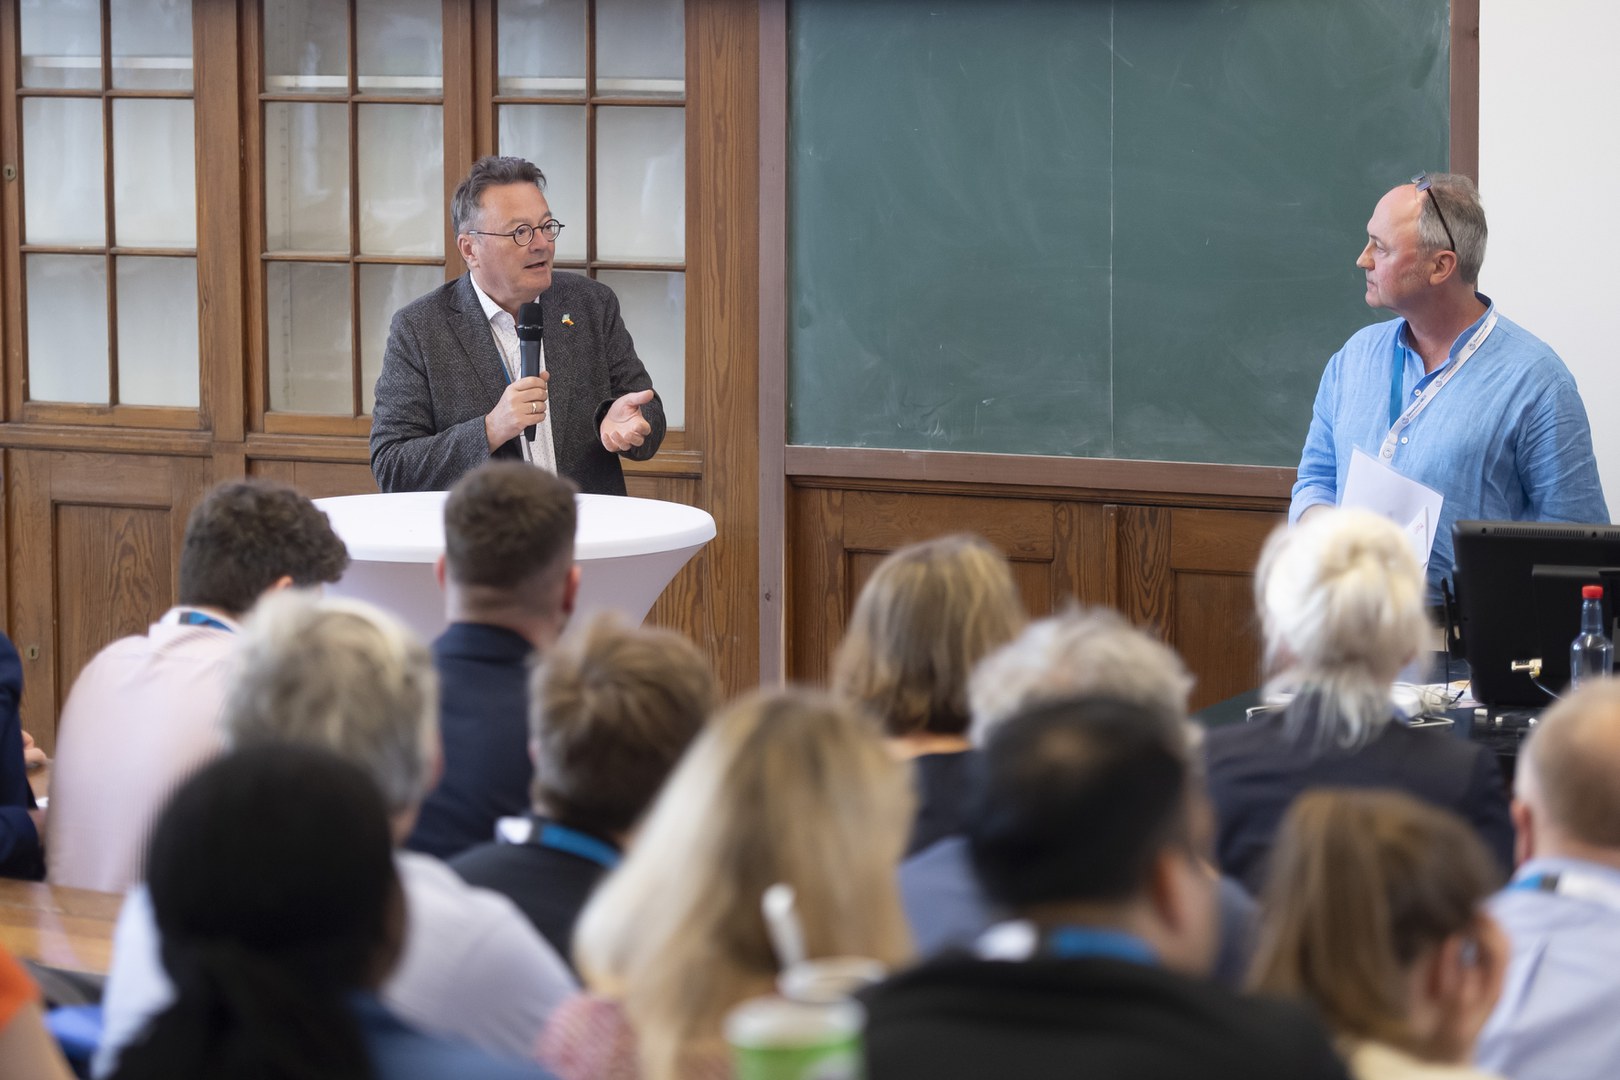 Prof. Dr. Klaus Greve from GIUB and Prof. Dr. Jörg Szarzynski from EHS, two of the founders of the Joint Master’s, closed the event by holding a round table discussion with current Joint Master’s students and alumni